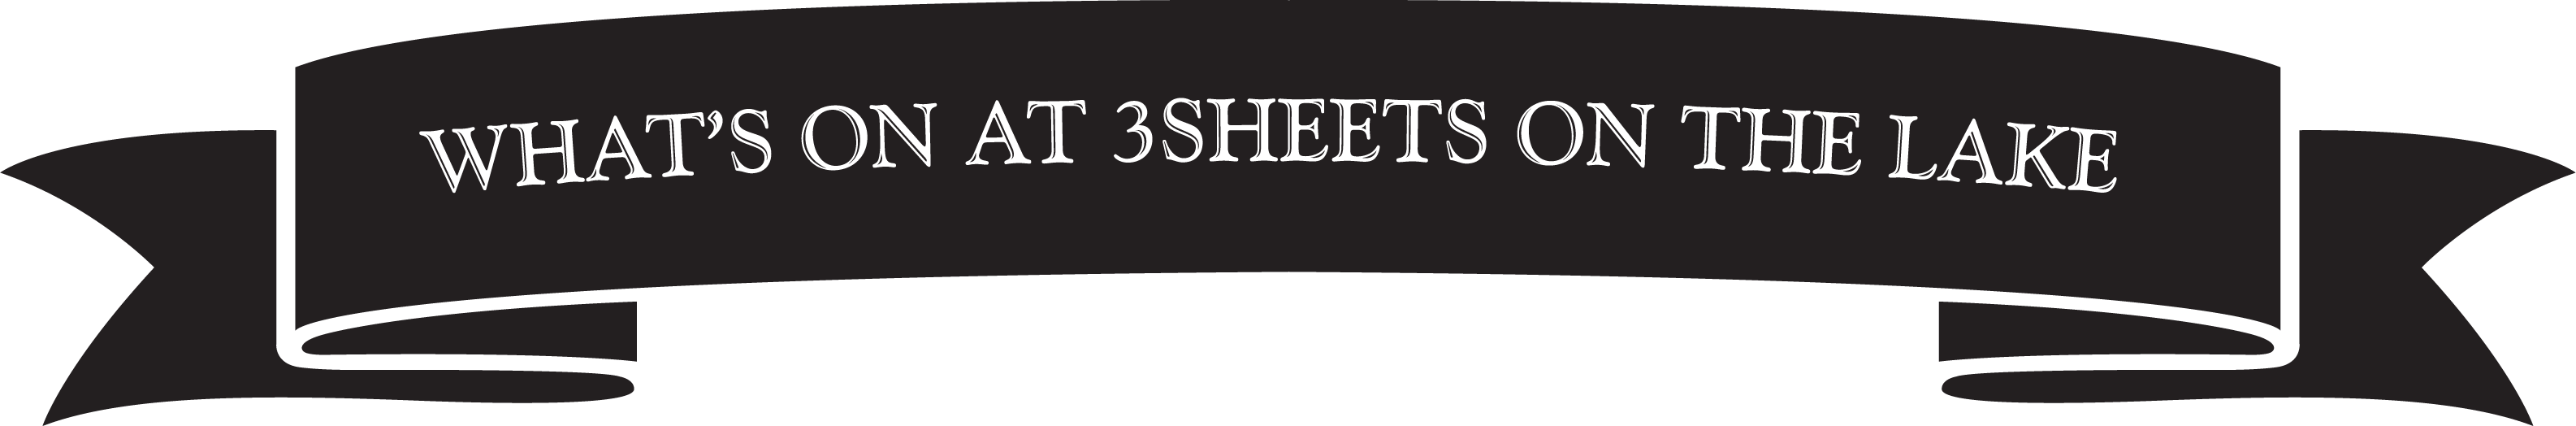 Whats On at 3Sheets on the Lake